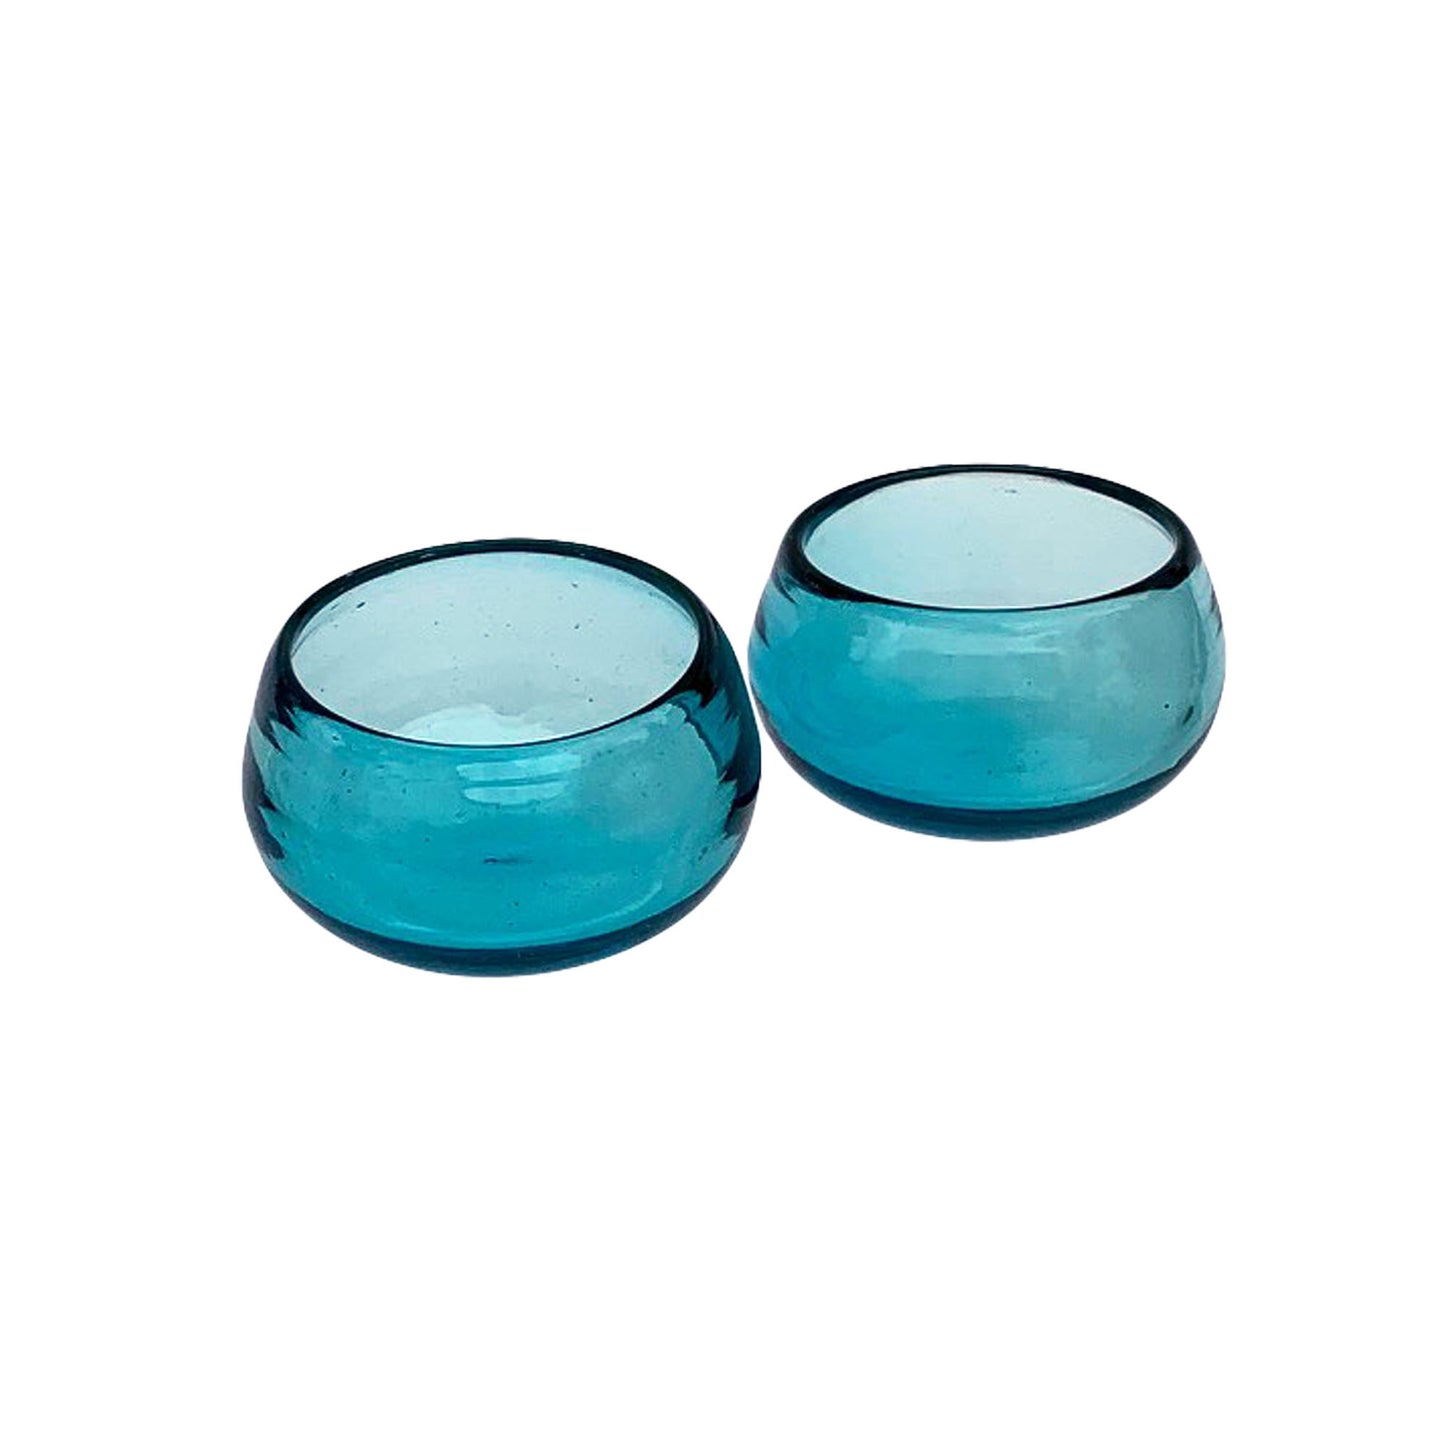 Mexican Hand Blown Recycled Glass Copitas for Mezcal or Tequila | Handmade Wide Mouth Shot Glasses in Turquoise Blue